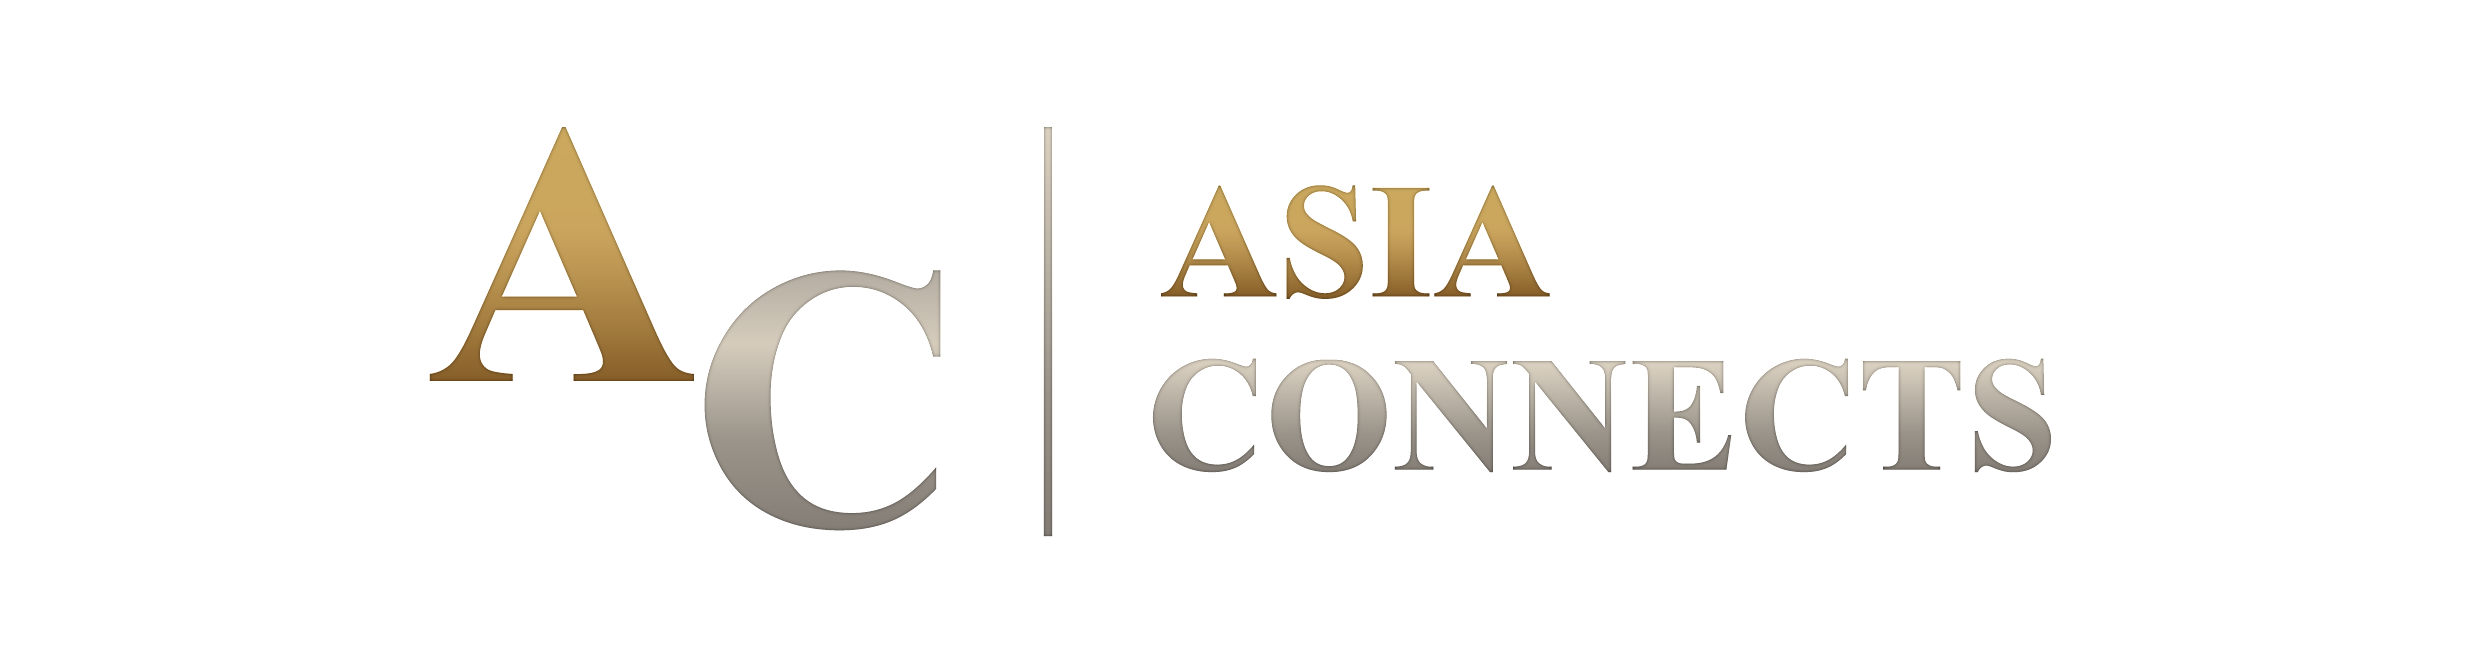 The Asia Connects